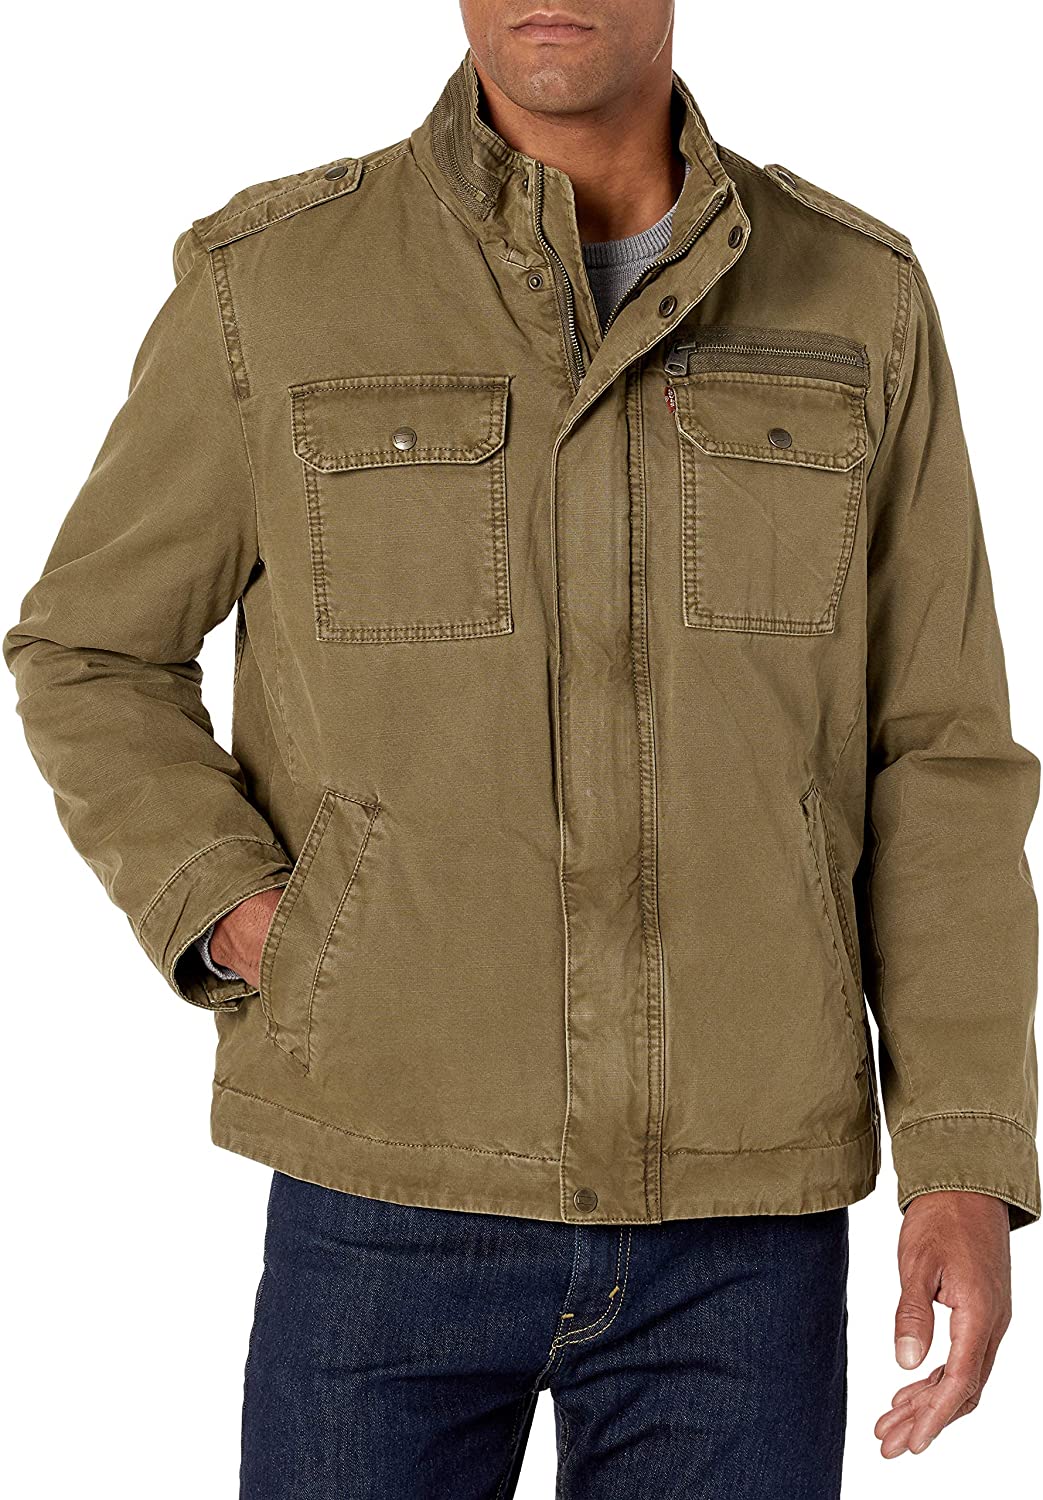 Levi's Men's Washed Cotton Two Pocket Sherpa Lined Military Jacket | eBay